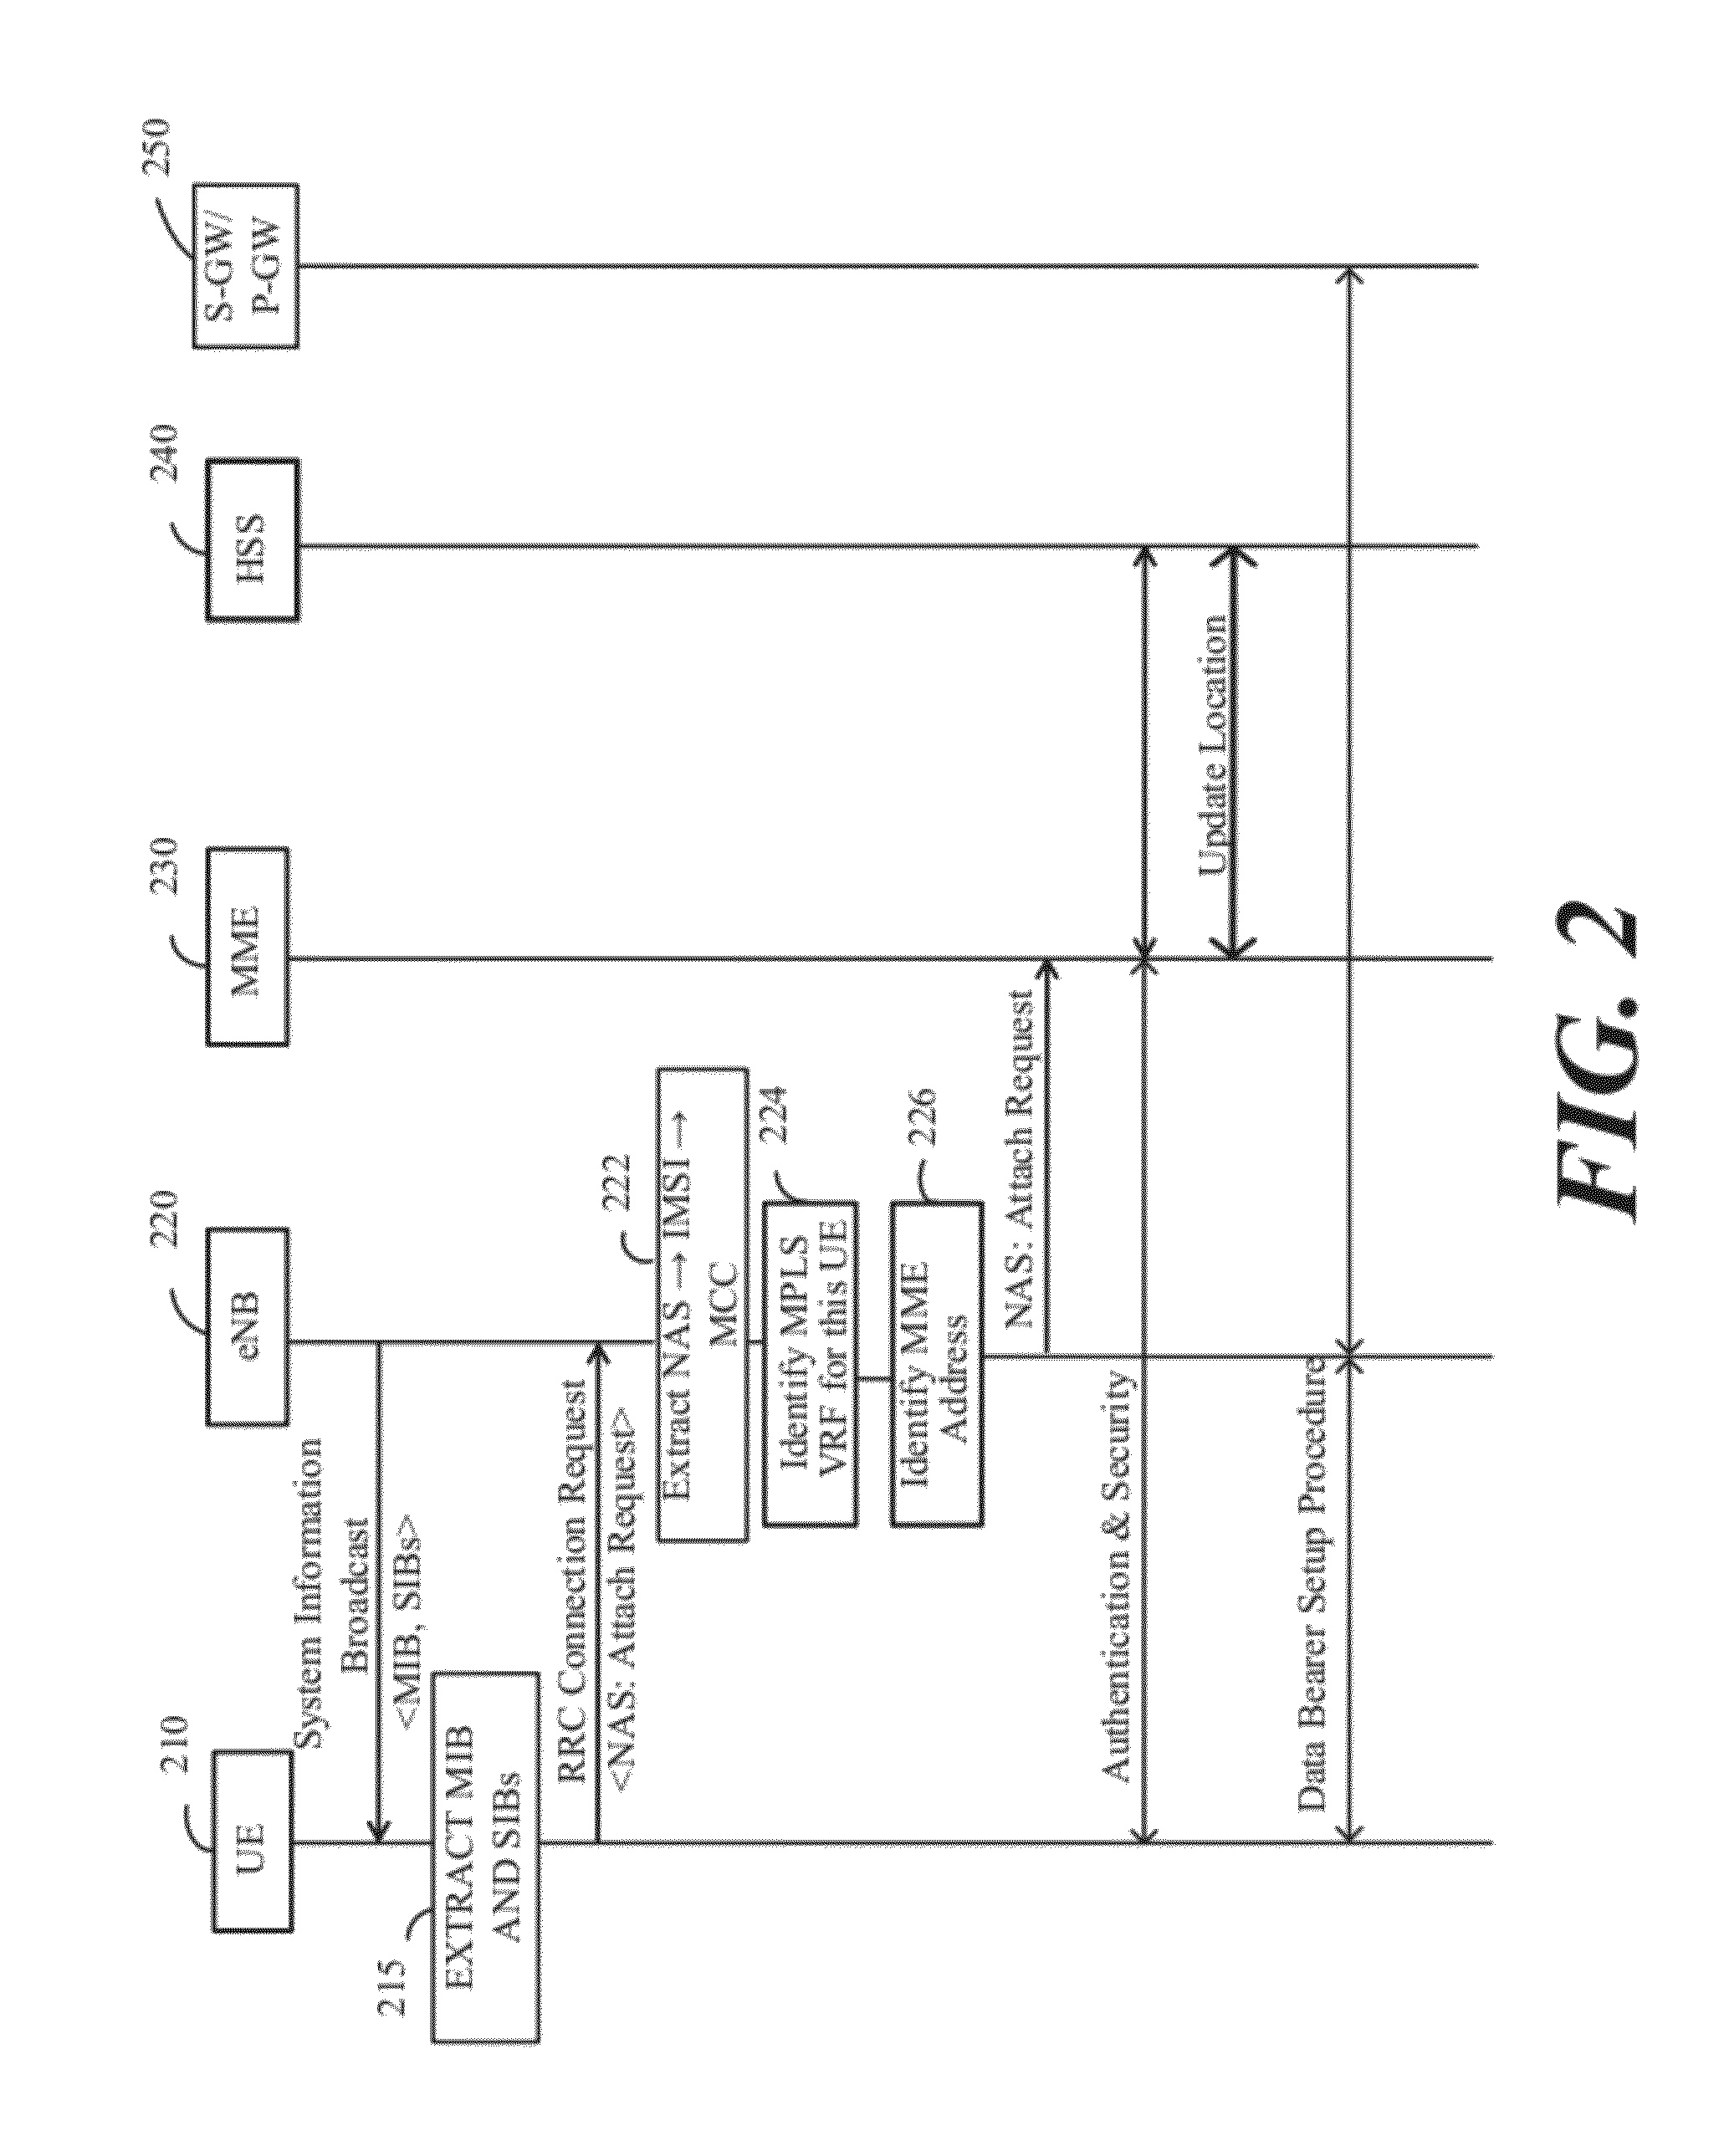 Method and apparatus for virtualization of wireless network